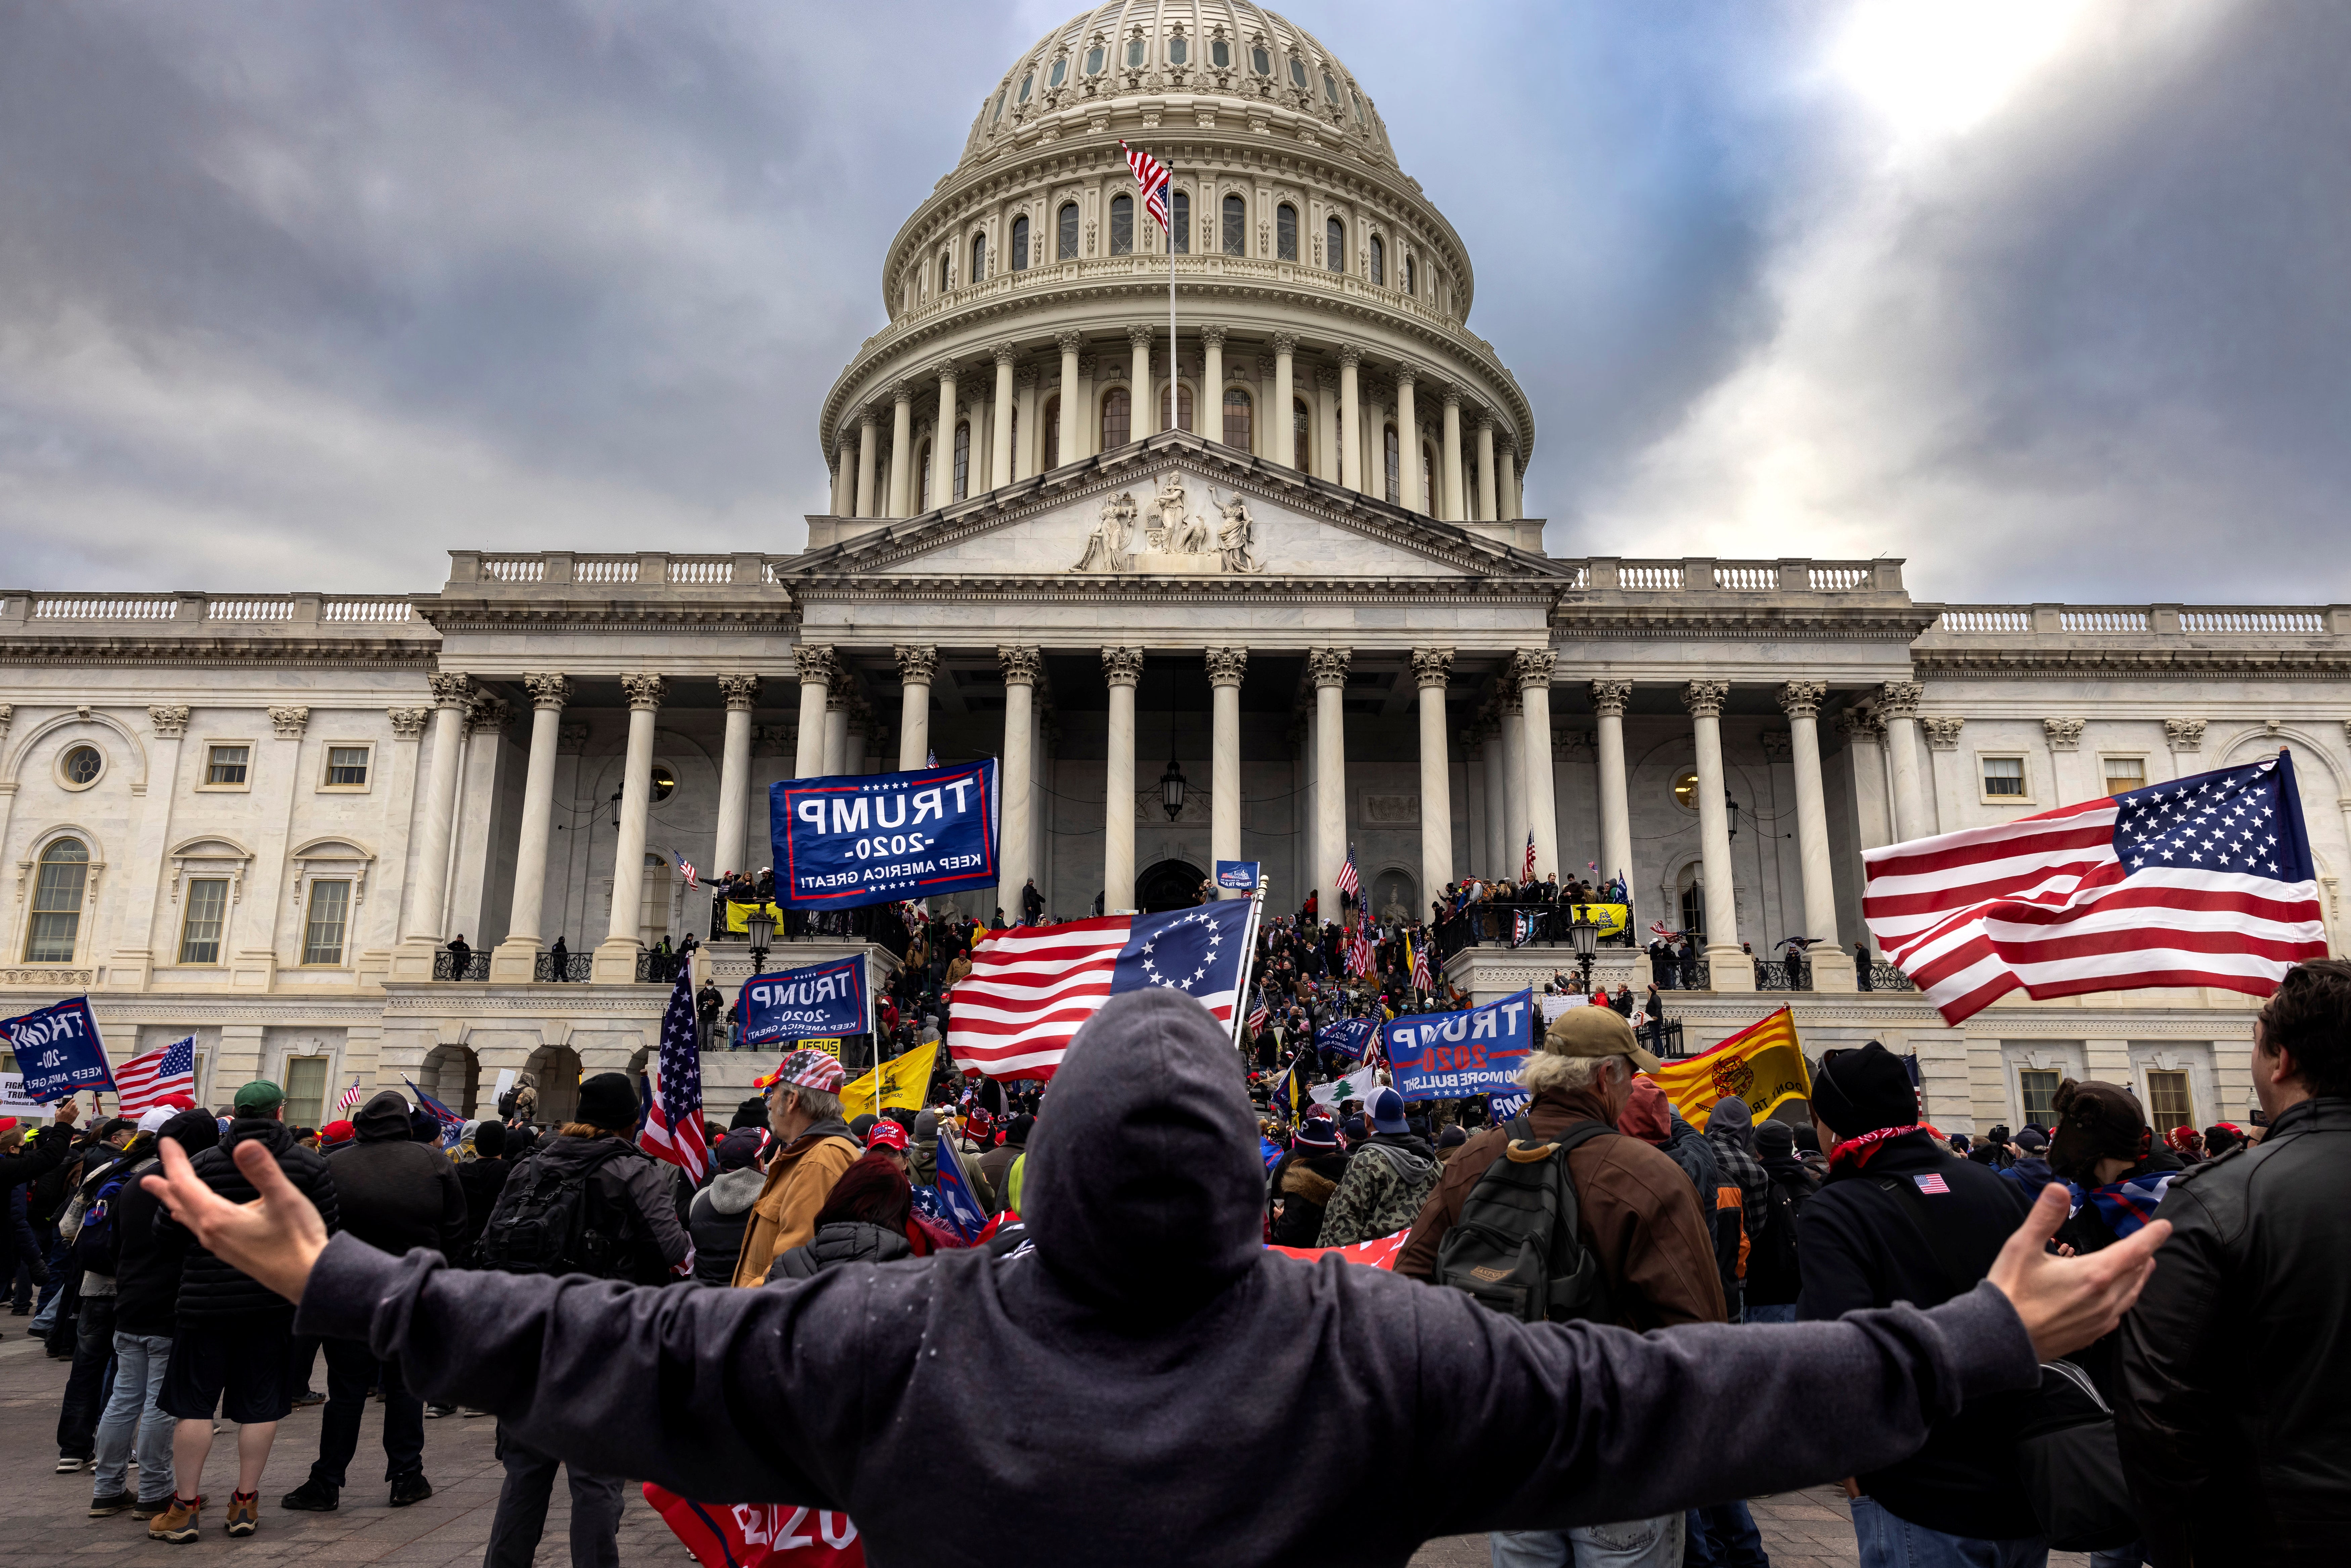 More than 200 people arrested over riot at US Capitol